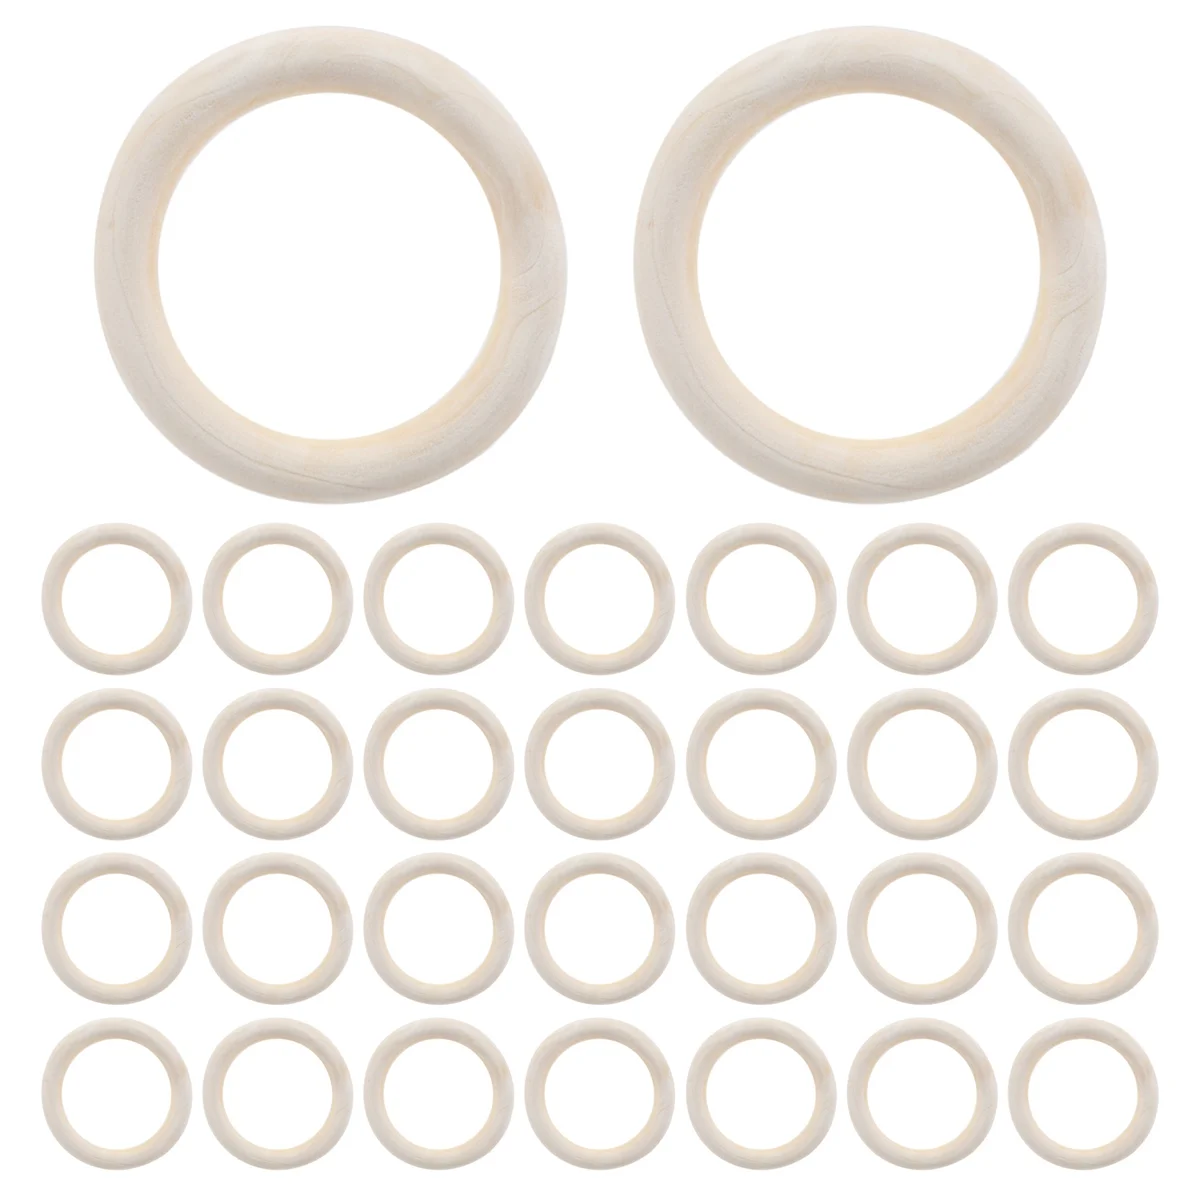 

30Pcs 70mm Wood Rings,Wooden Ring Wood Circles for DIY Crafts, Macrame Plant Hanger,Ornaments and Jewelry Making